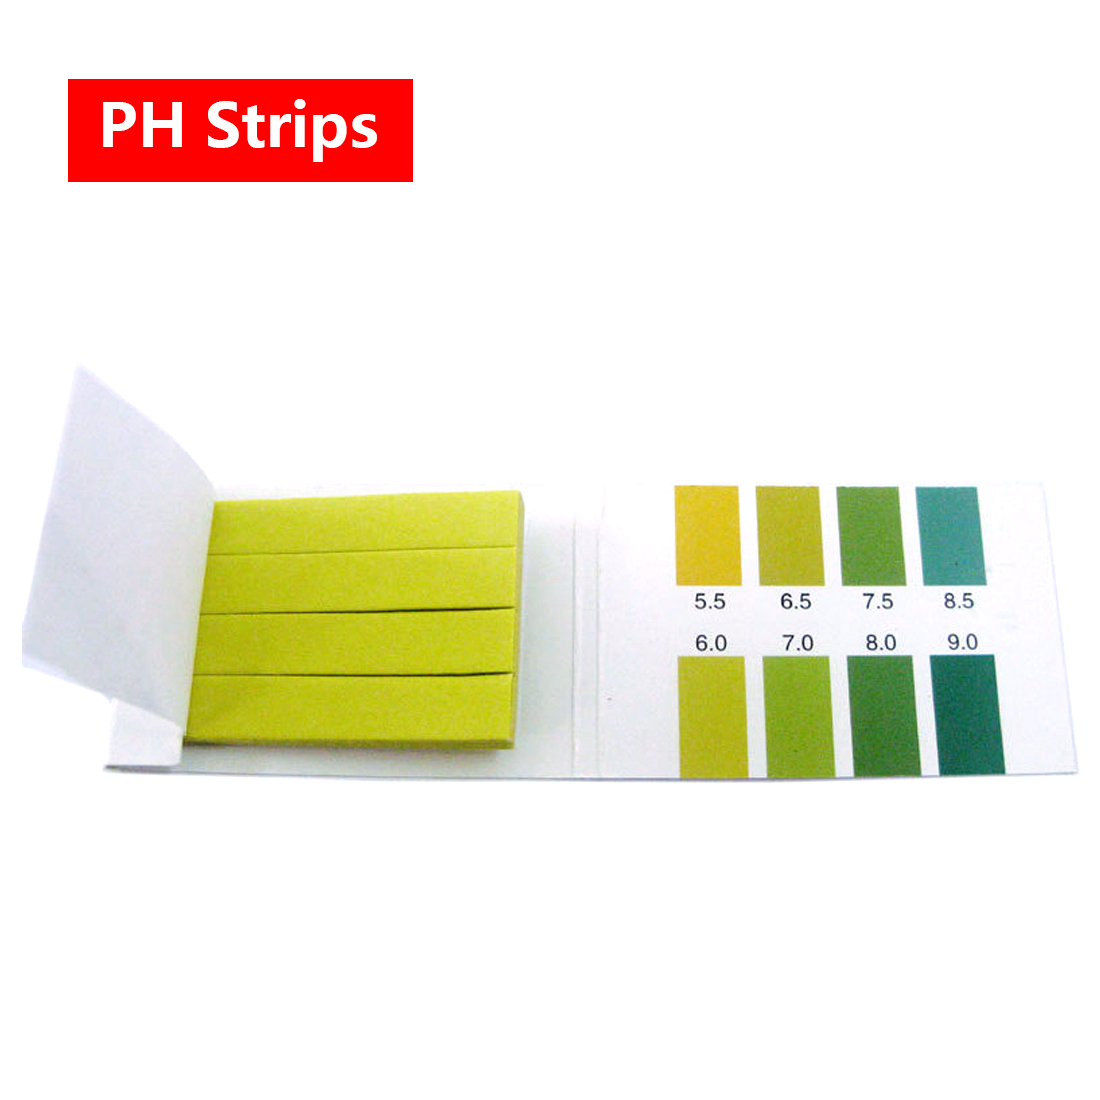 Accurate 80 Pieces PH 5.4-7.0 Test Papers Strips Indicator Paper Lab Litmus 